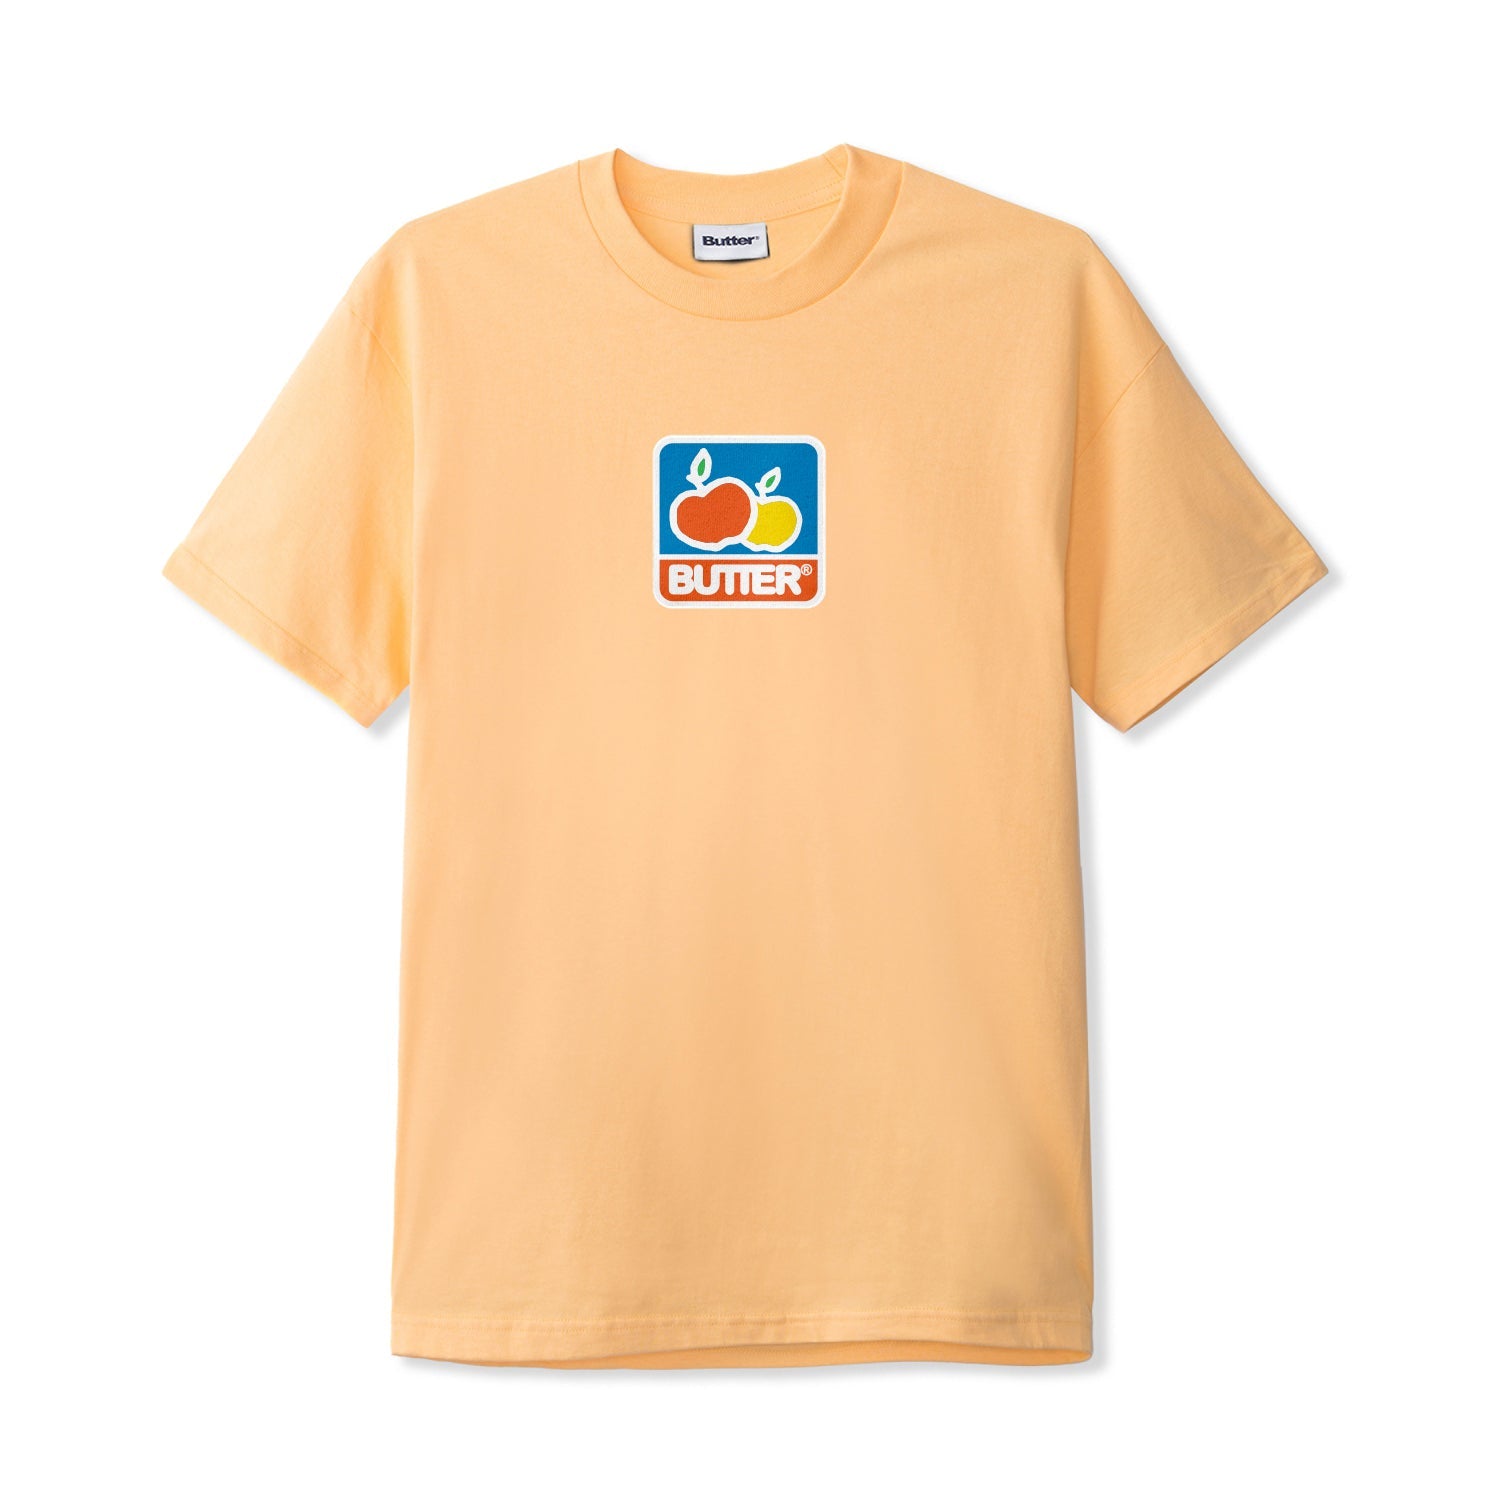 Butter Grove Tee Squash Large